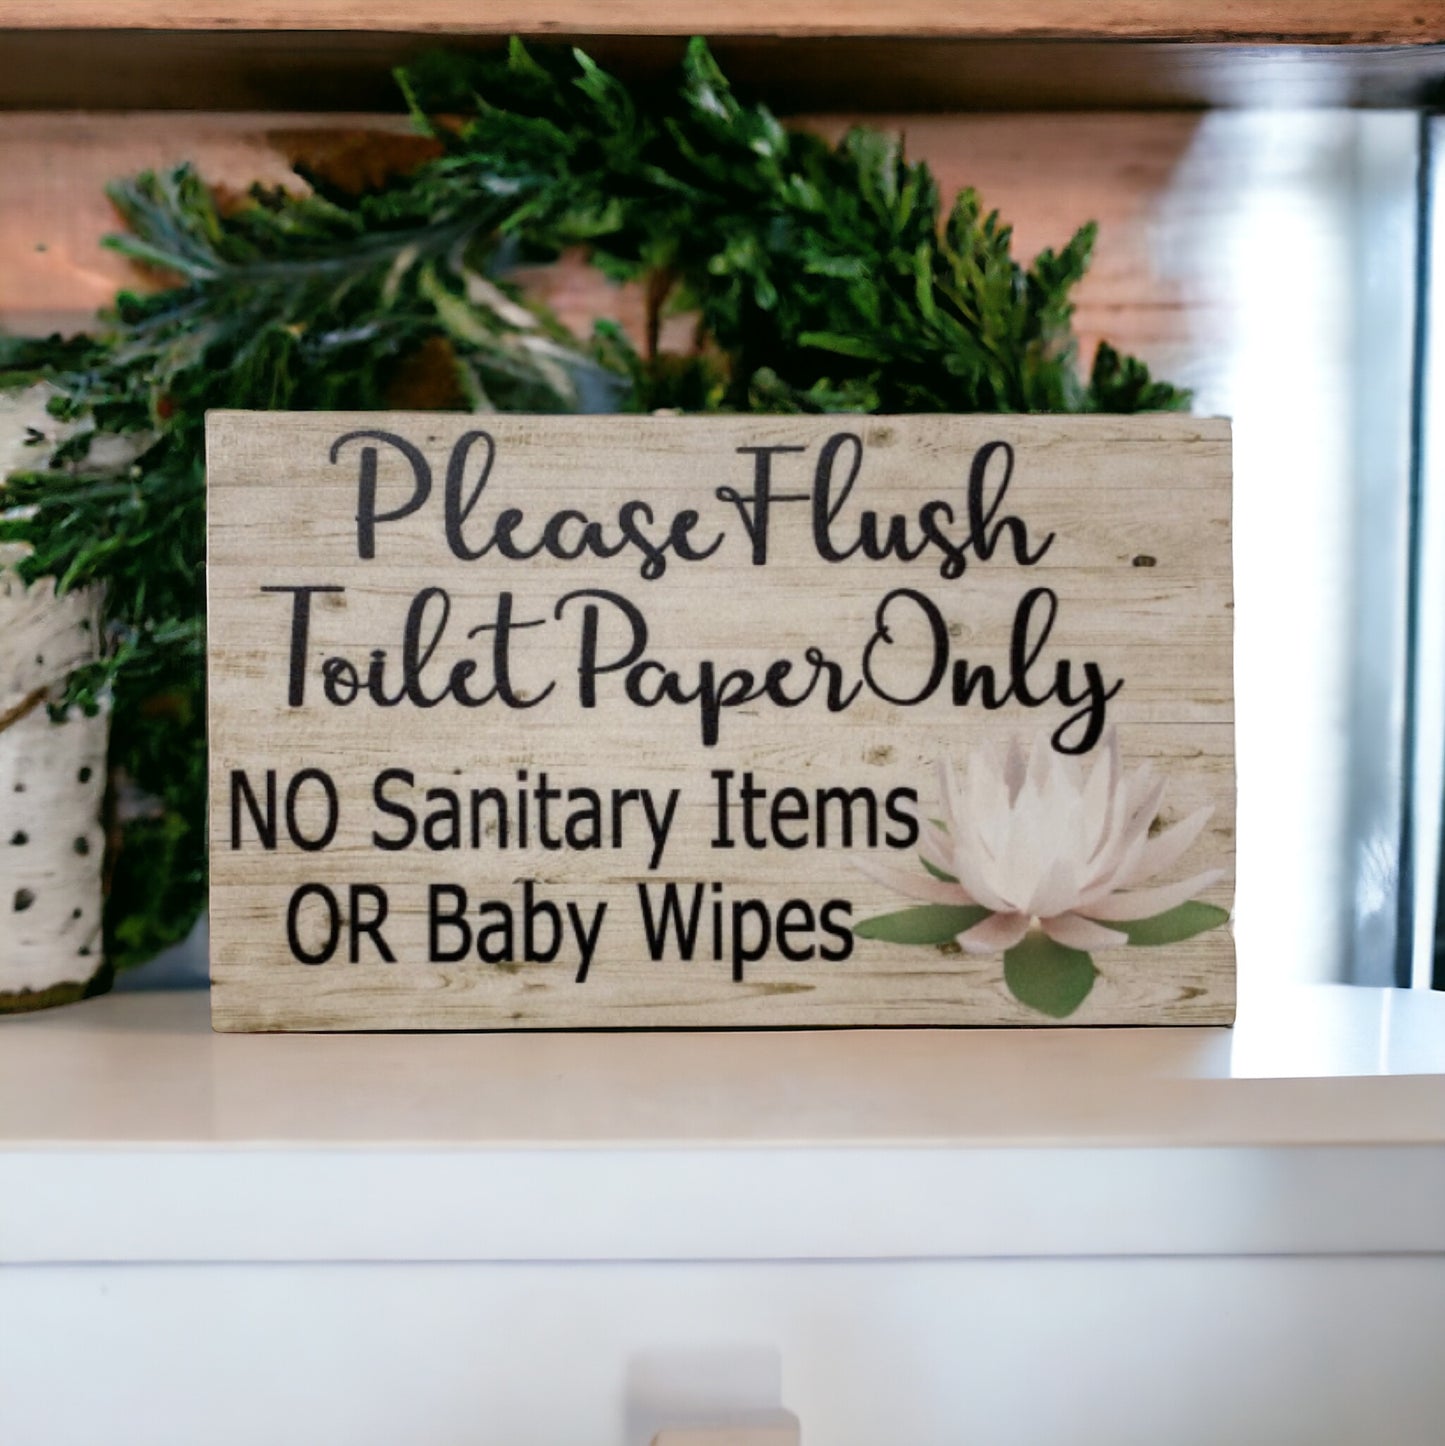 Flush Toilet Paper Only No Sanitary Baby Wipes Lotus Sign - The Renmy Store Homewares & Gifts 